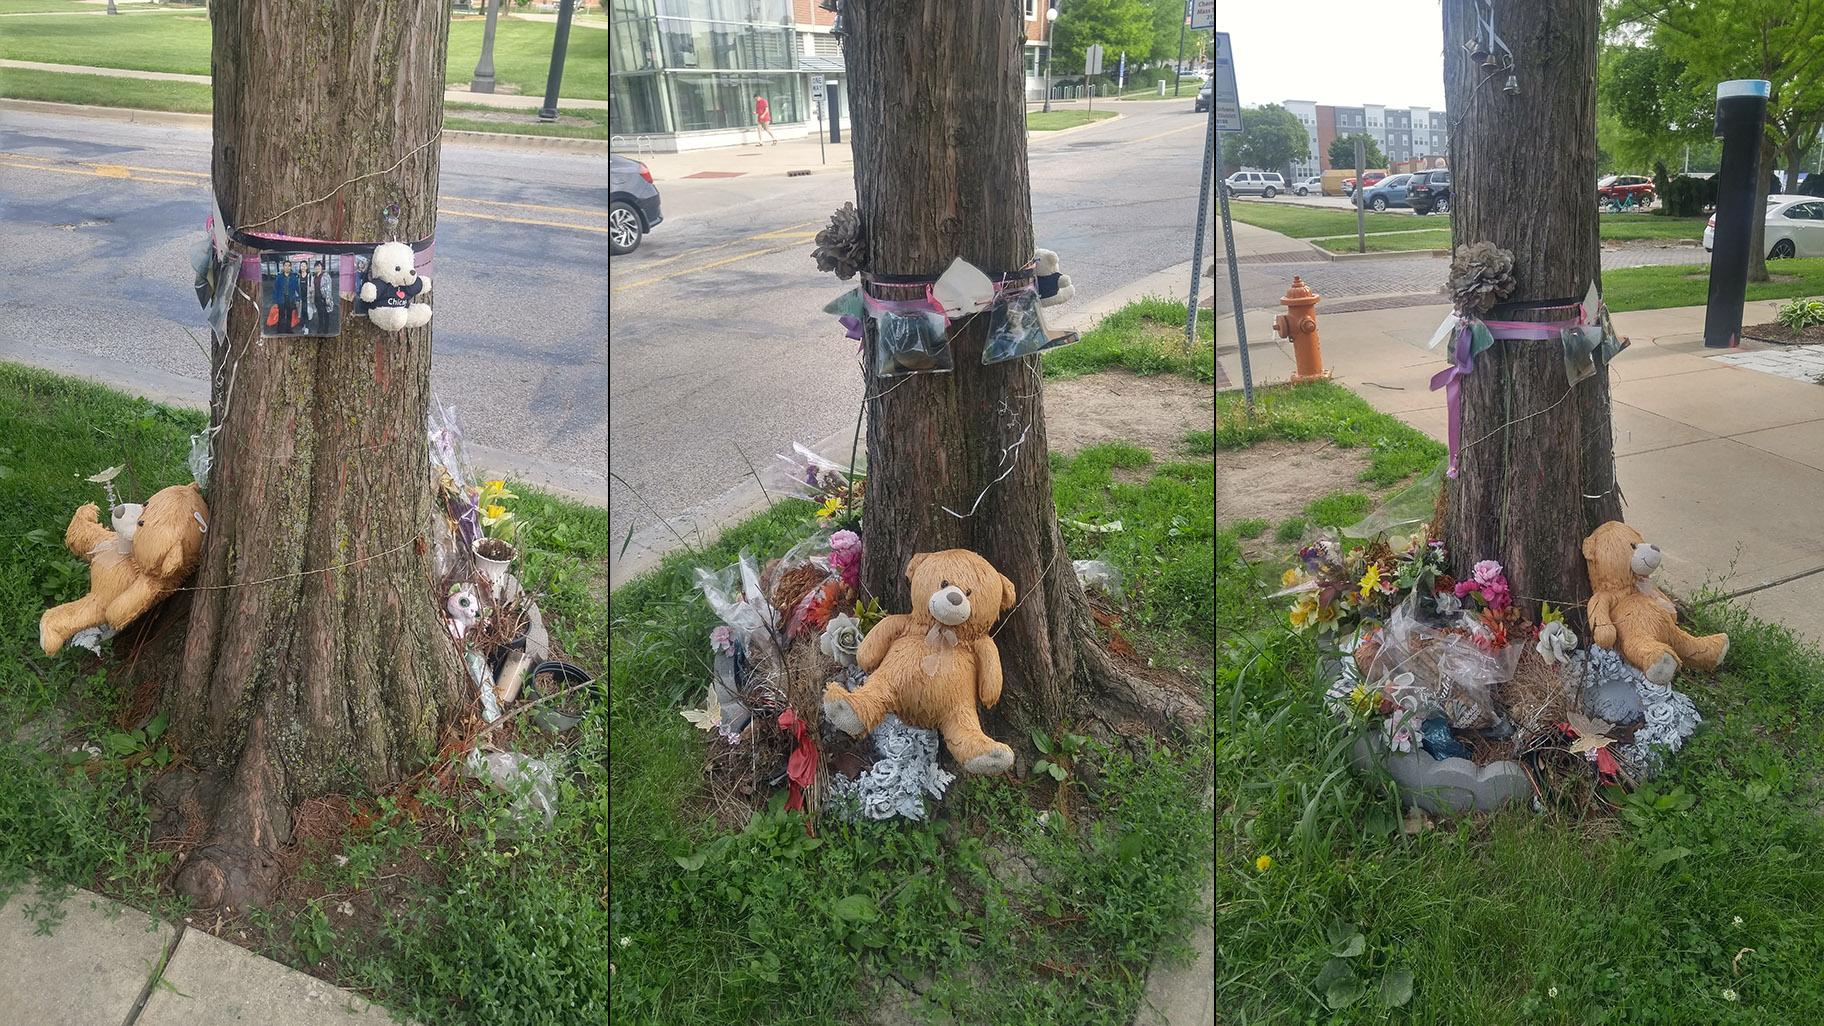 Flowers, photos and a teddy bear are among the items left at a makeshift memorial at the intersection of Goodwin Avenue and Clark Street in Urbana, seen here on June 7, 2019, nearly two years after Yingying Zhang’s disappearance from the U. of I. campus. (Photos by Mark Van Moer)